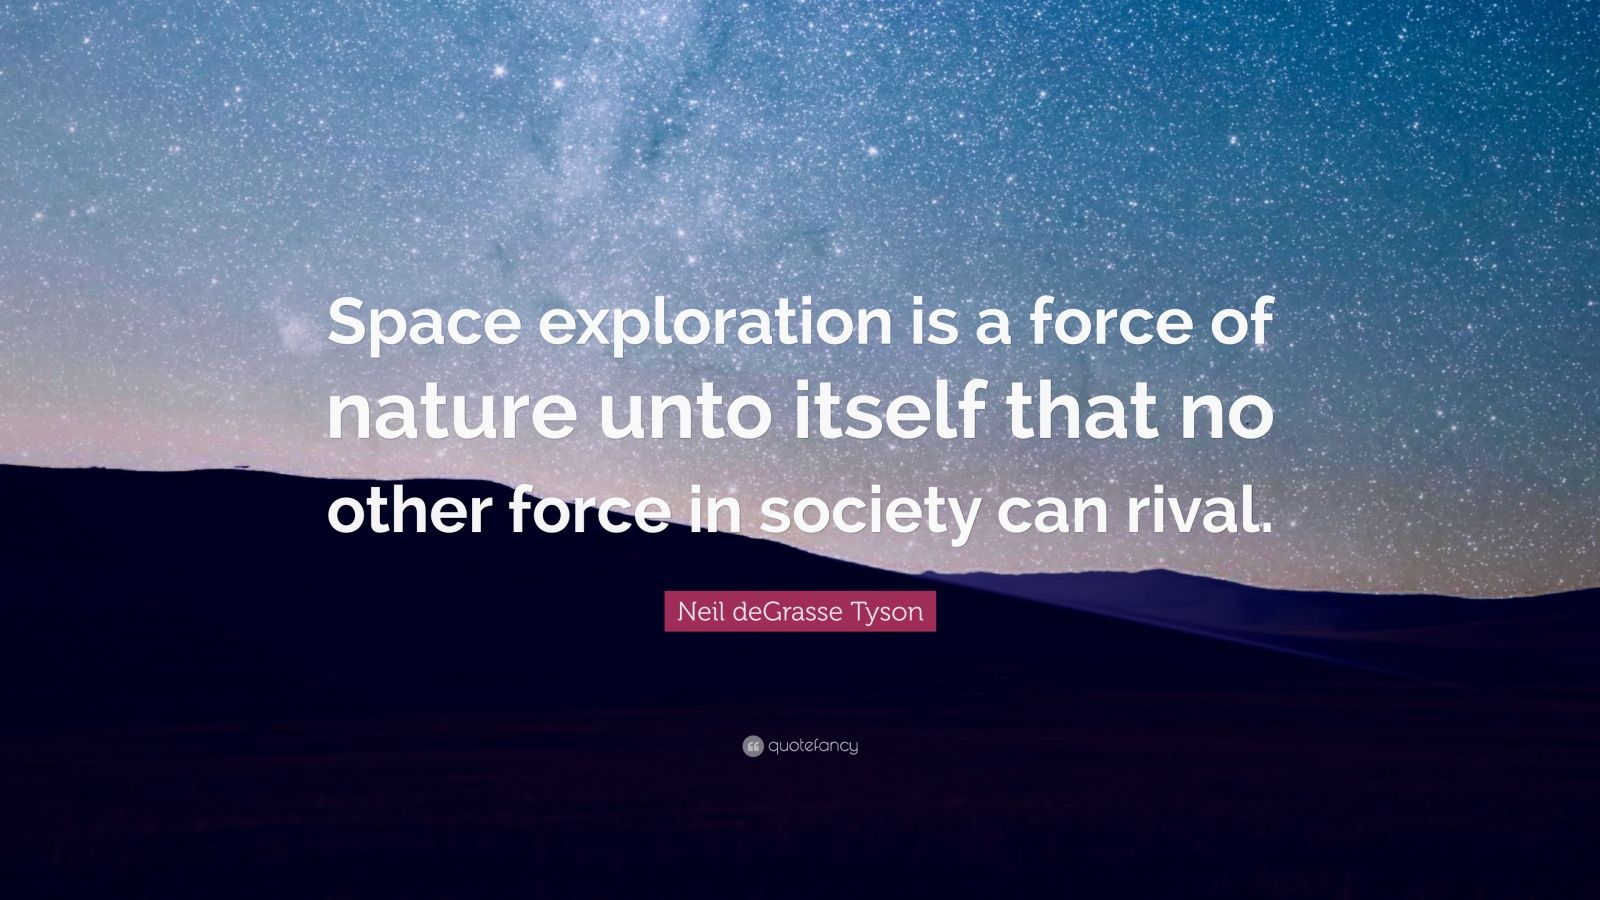 Neil deGrasse Tyson Quote: “Space exploration is a force ...